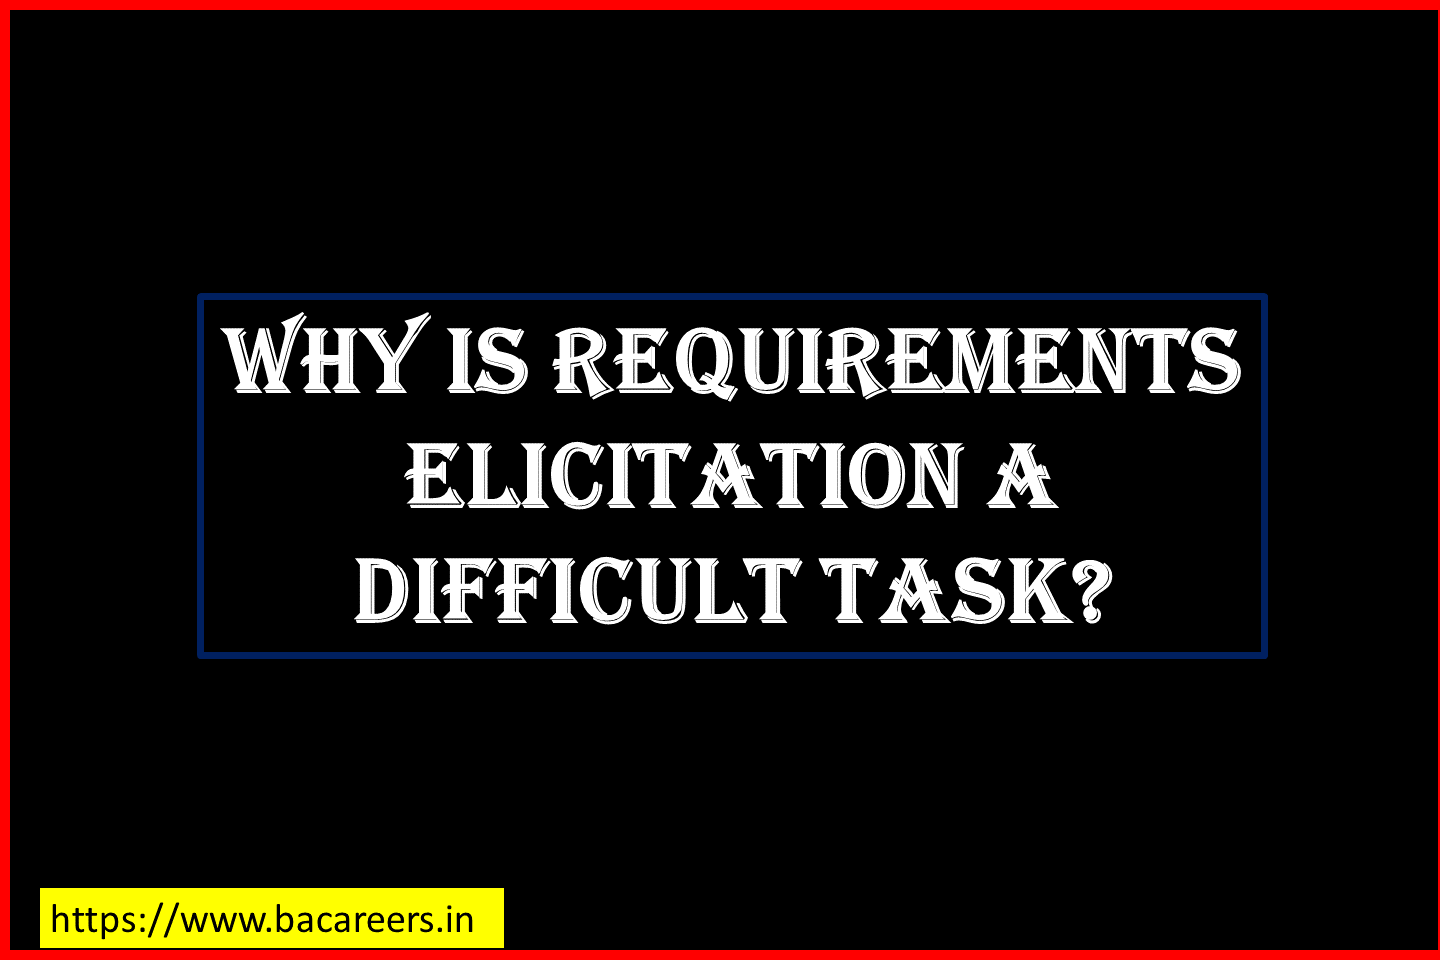 Why Is Requirements Elicitation A Difficult Task